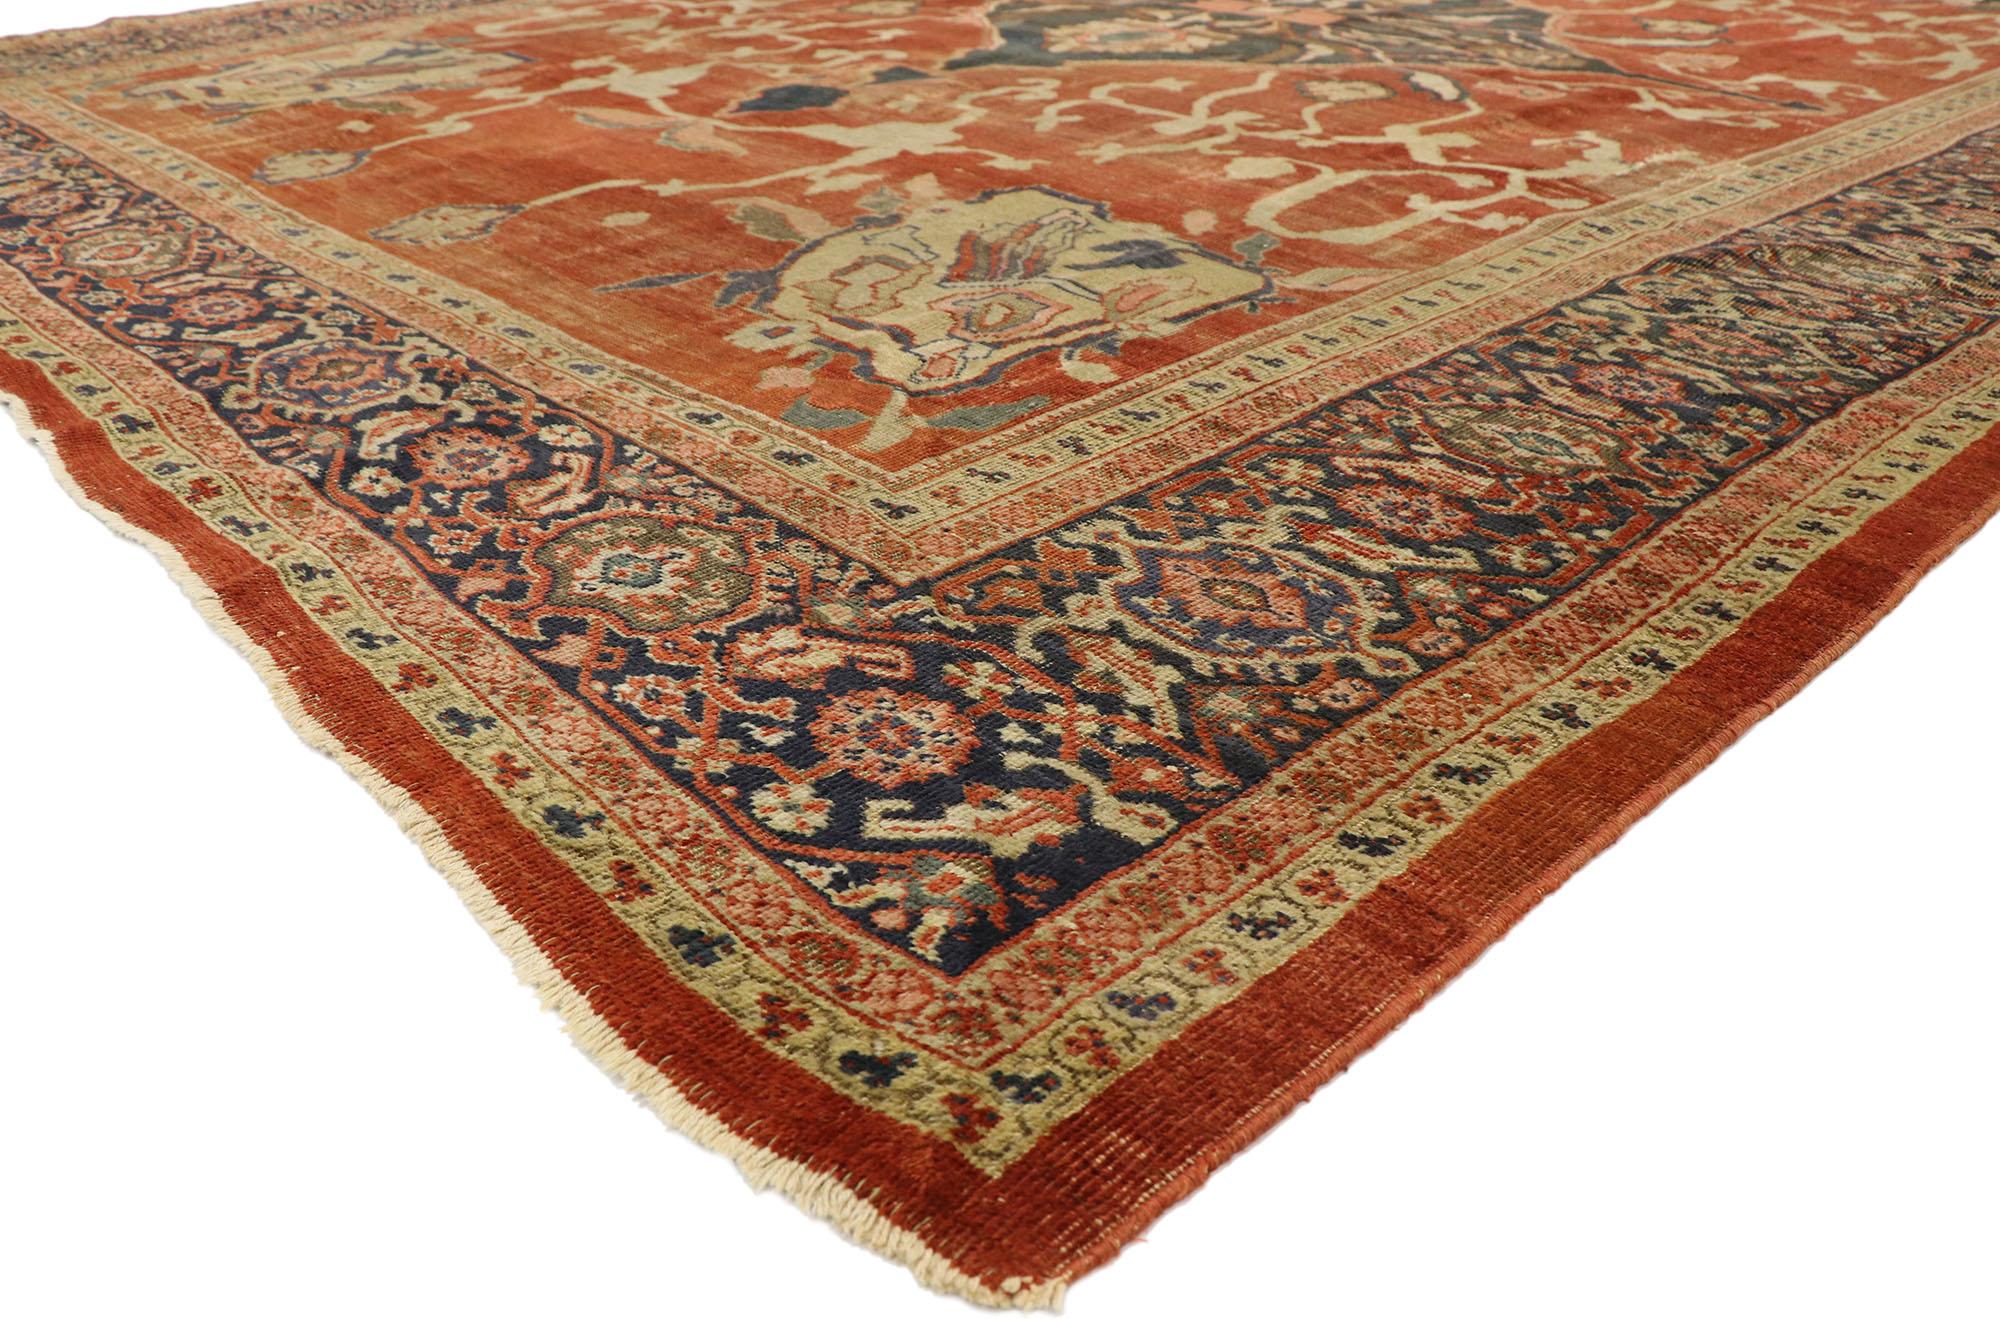 ​74681 Late 19th Century Distressed Antique Persian Sultanabad Rug with Traditional English Rustic Style 10'03 x 13'04. Balancing a timeless medallion design with traditional sensibility and a lovingly timeworn patina, this hand knotted wool Late